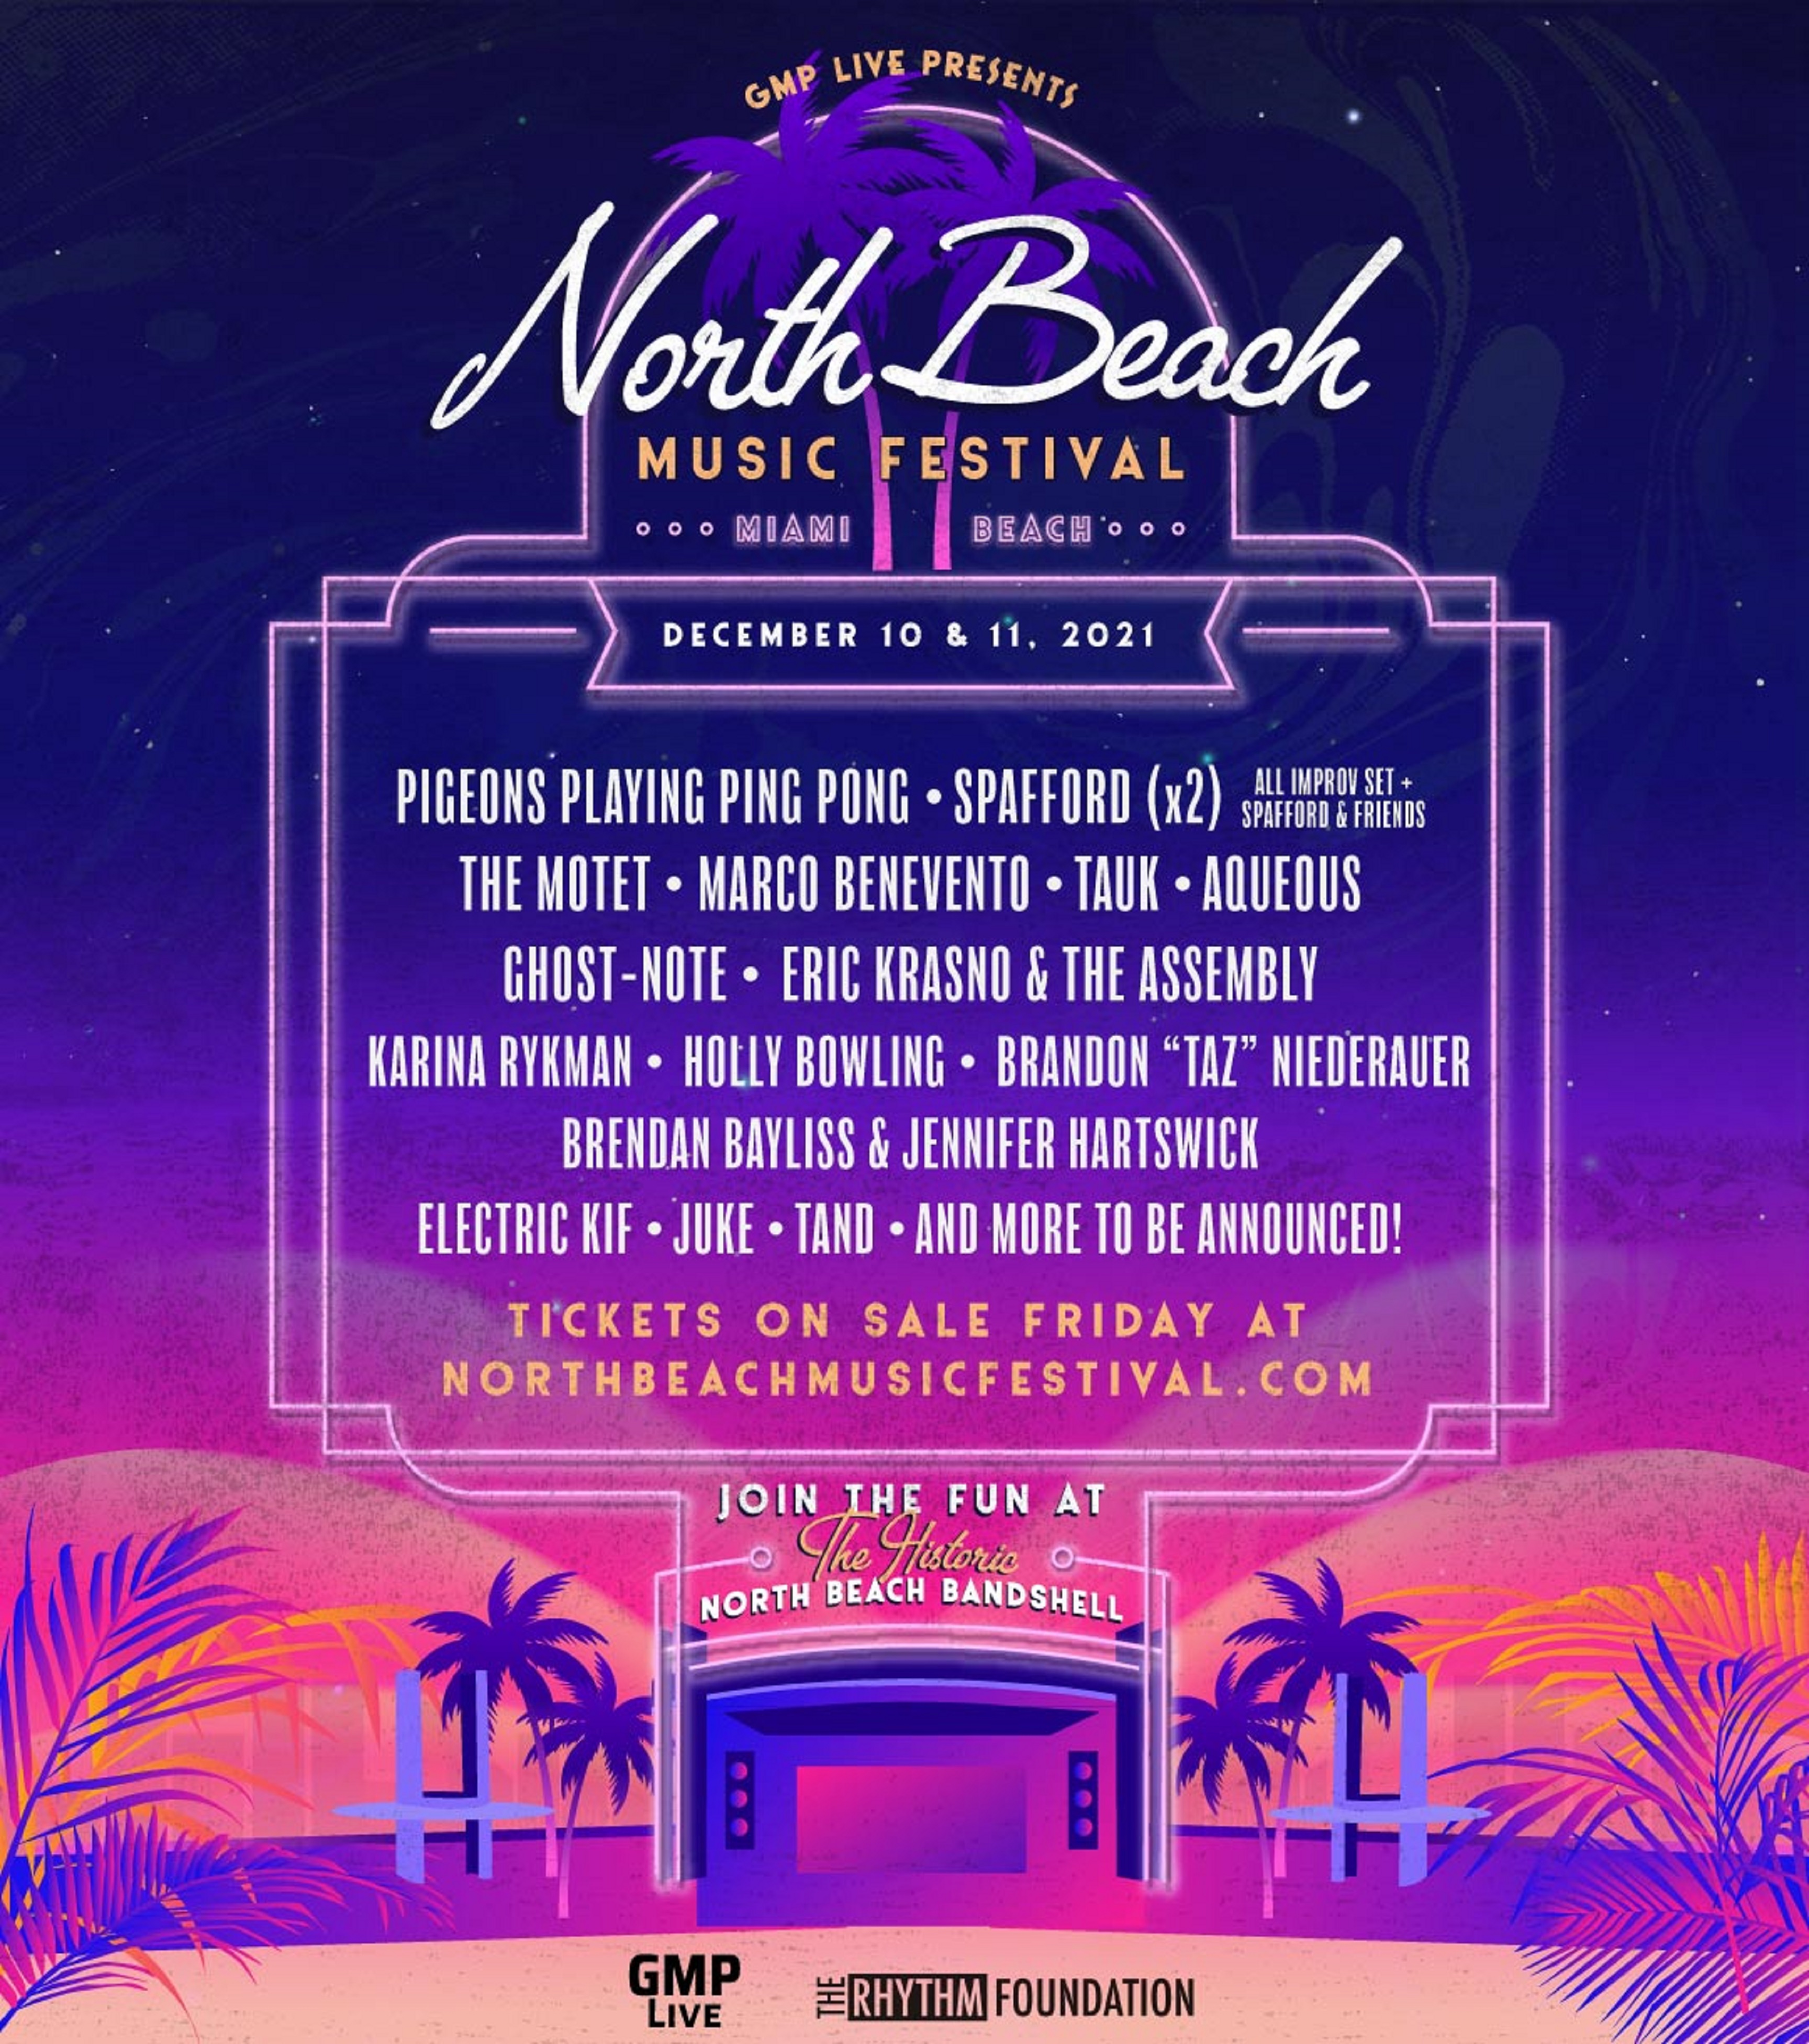 PIGEONS PLAYING PING PONG, SPAFFORD, THE MOTET, MARCO BENEVENTO & MORE TO PLAY INAUGURAL NORTH BEACH MUSIC FESTIVAL